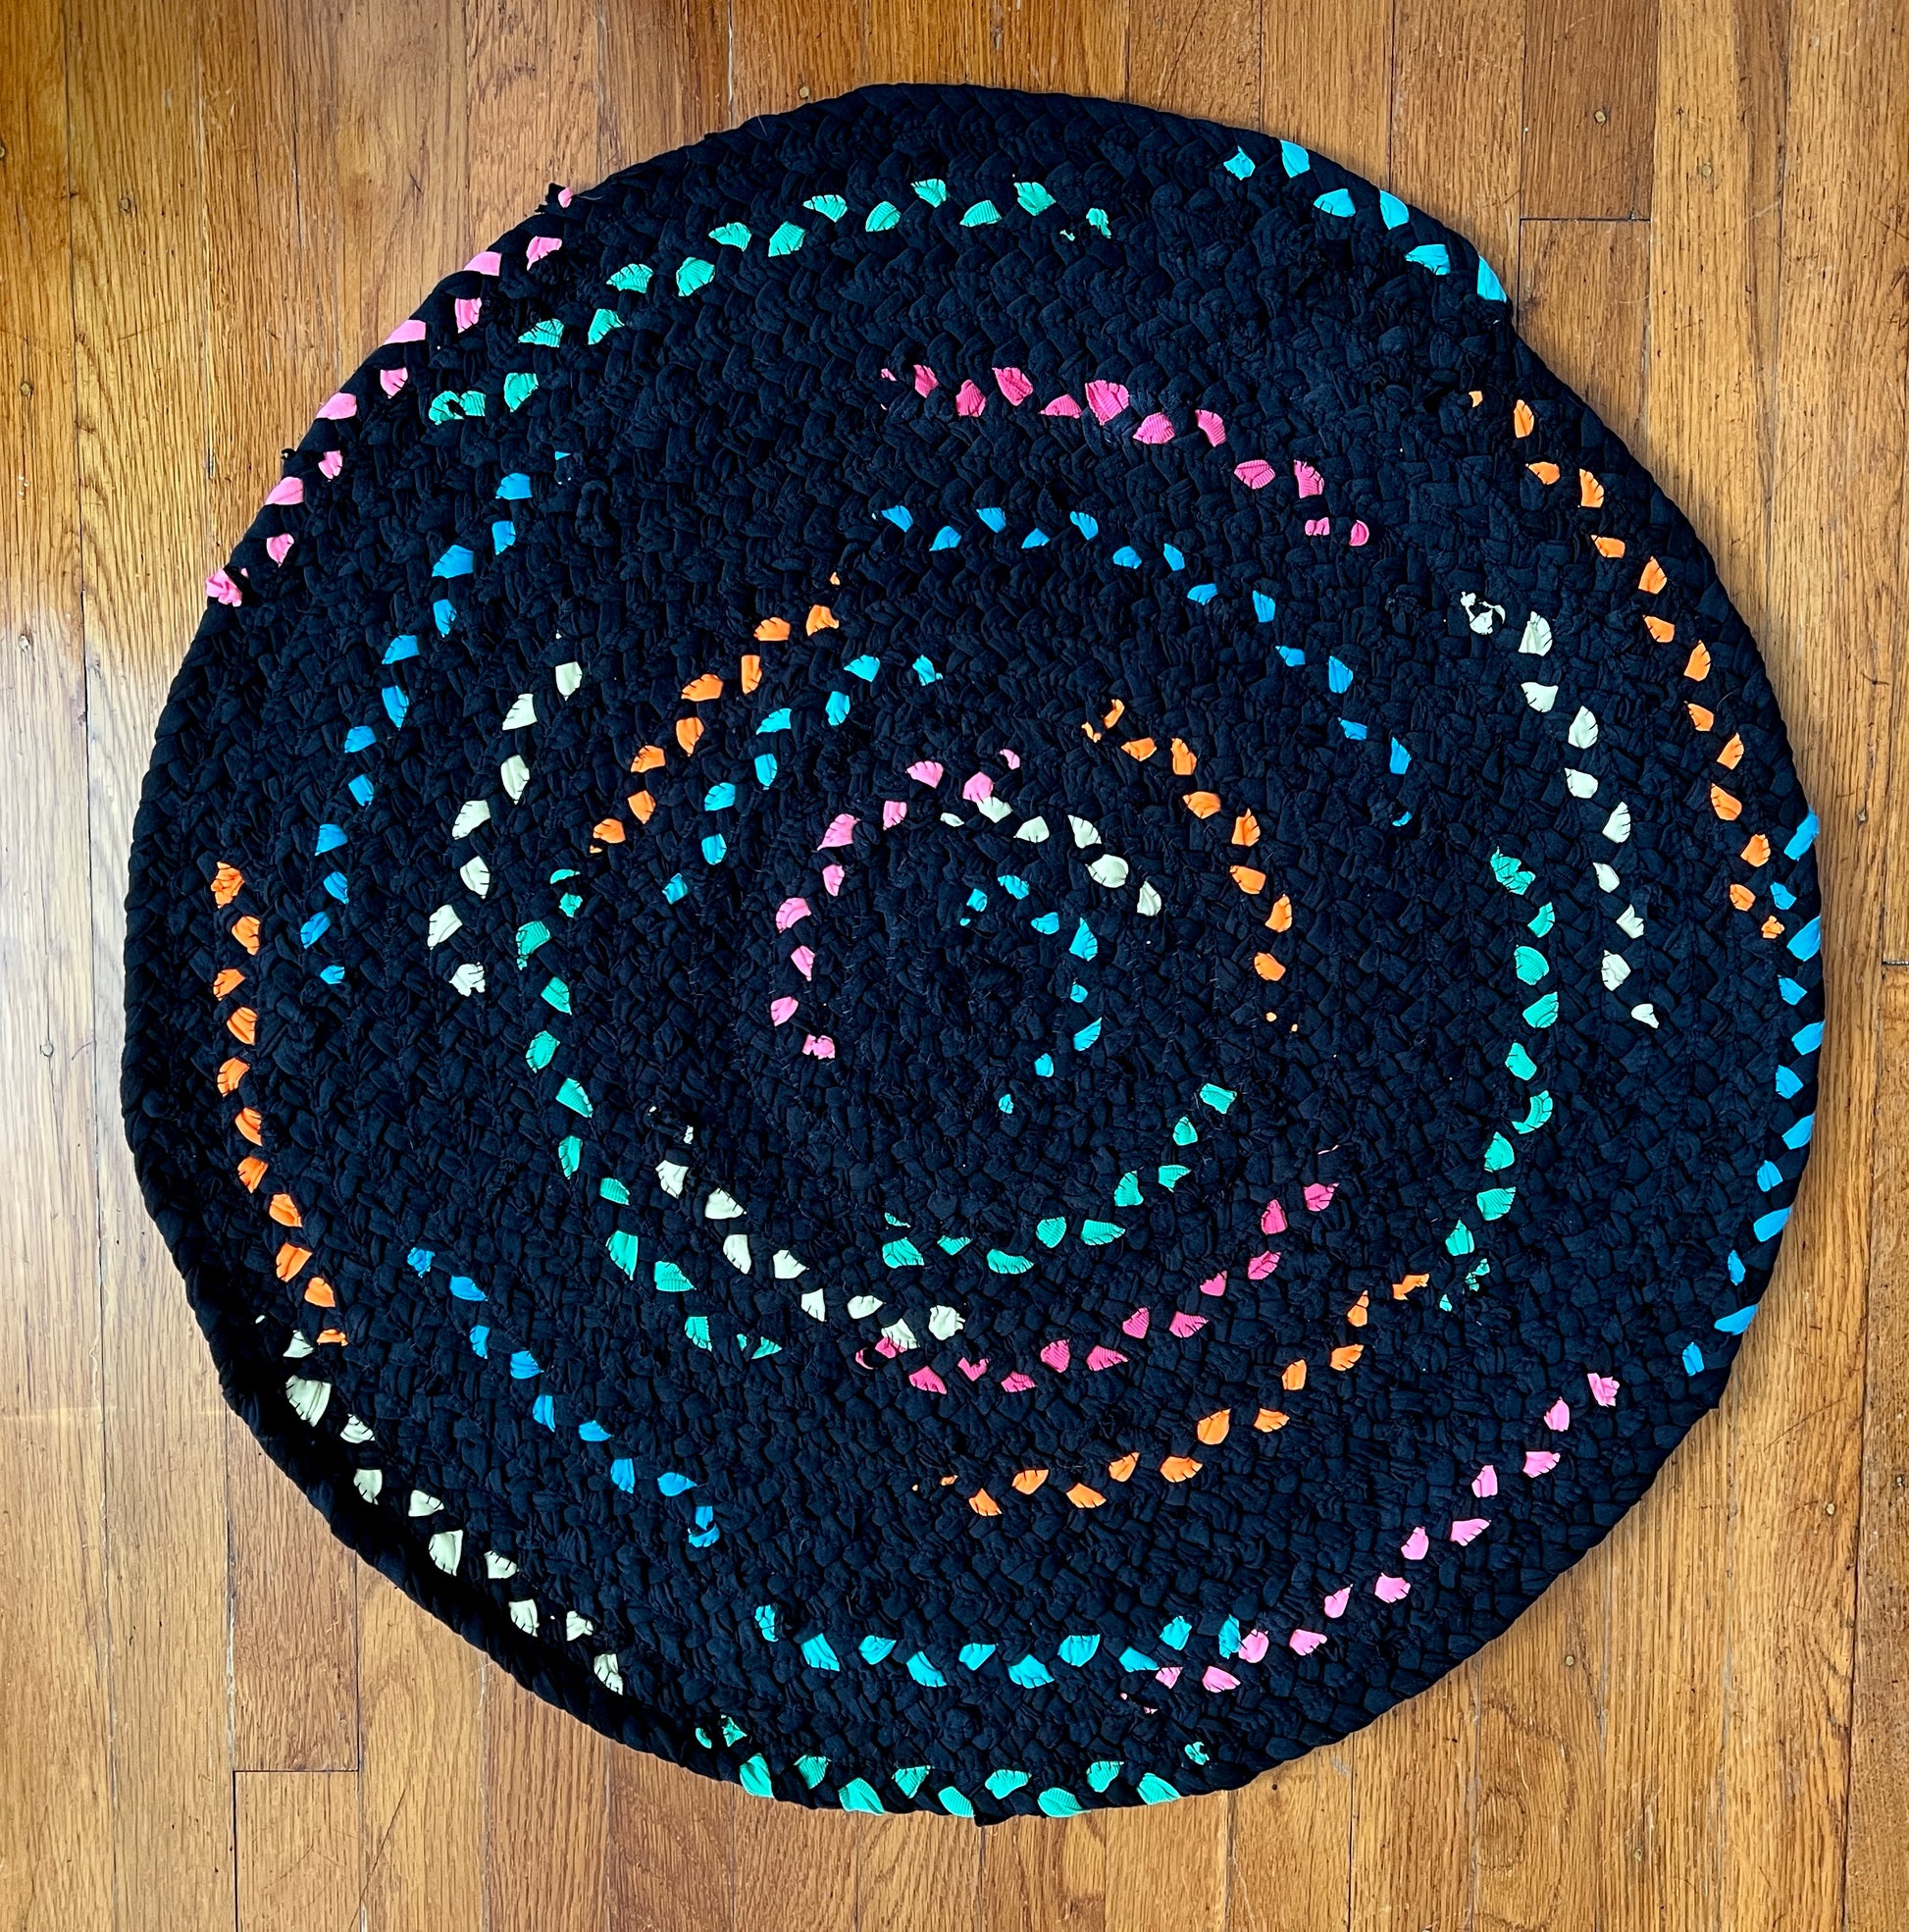 Neon colors run sporadically through all black strands in this unique rug!